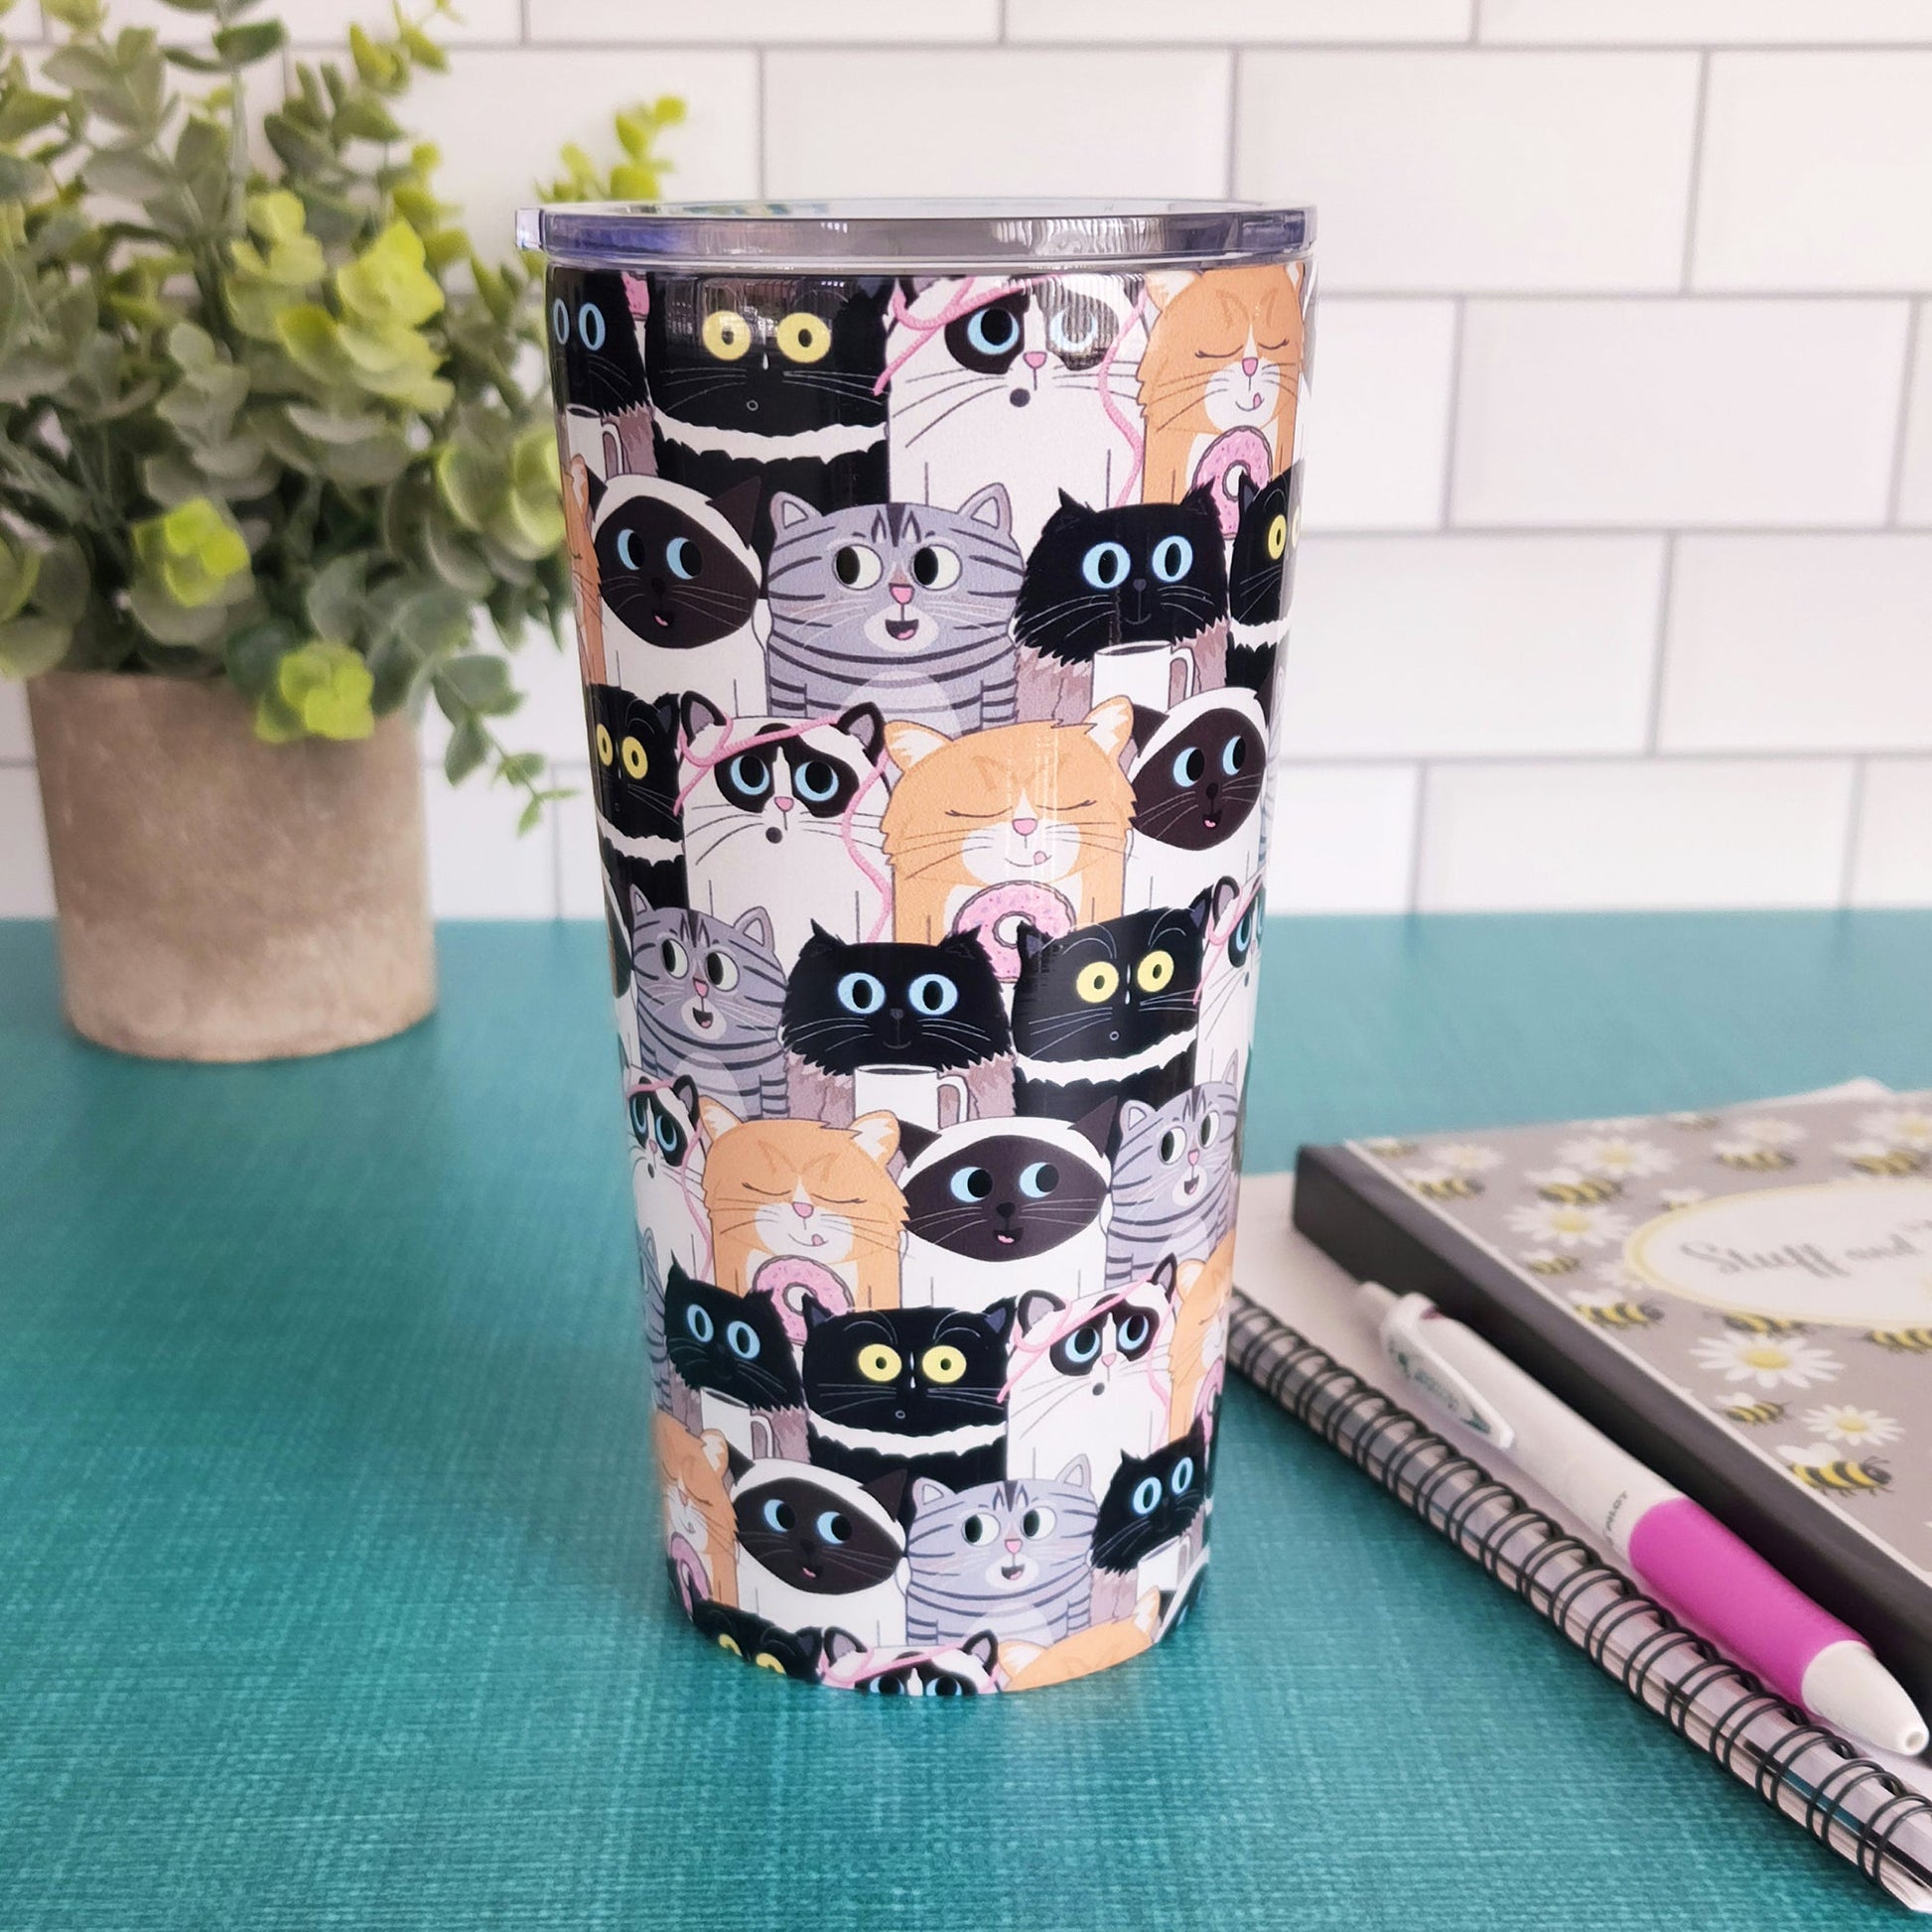 Cute Cat Stack Pattern Tumbler Cup (20oz) at Amy's Coffee Mugs. A cute cats tumbler cup with an illustrated pattern of different breeds of cats with different fun expressions, with yarn, coffee, and donuts. This stacked pattern of cats wraps around the cup. Picture shows both cup sizes on a counter next to each other.